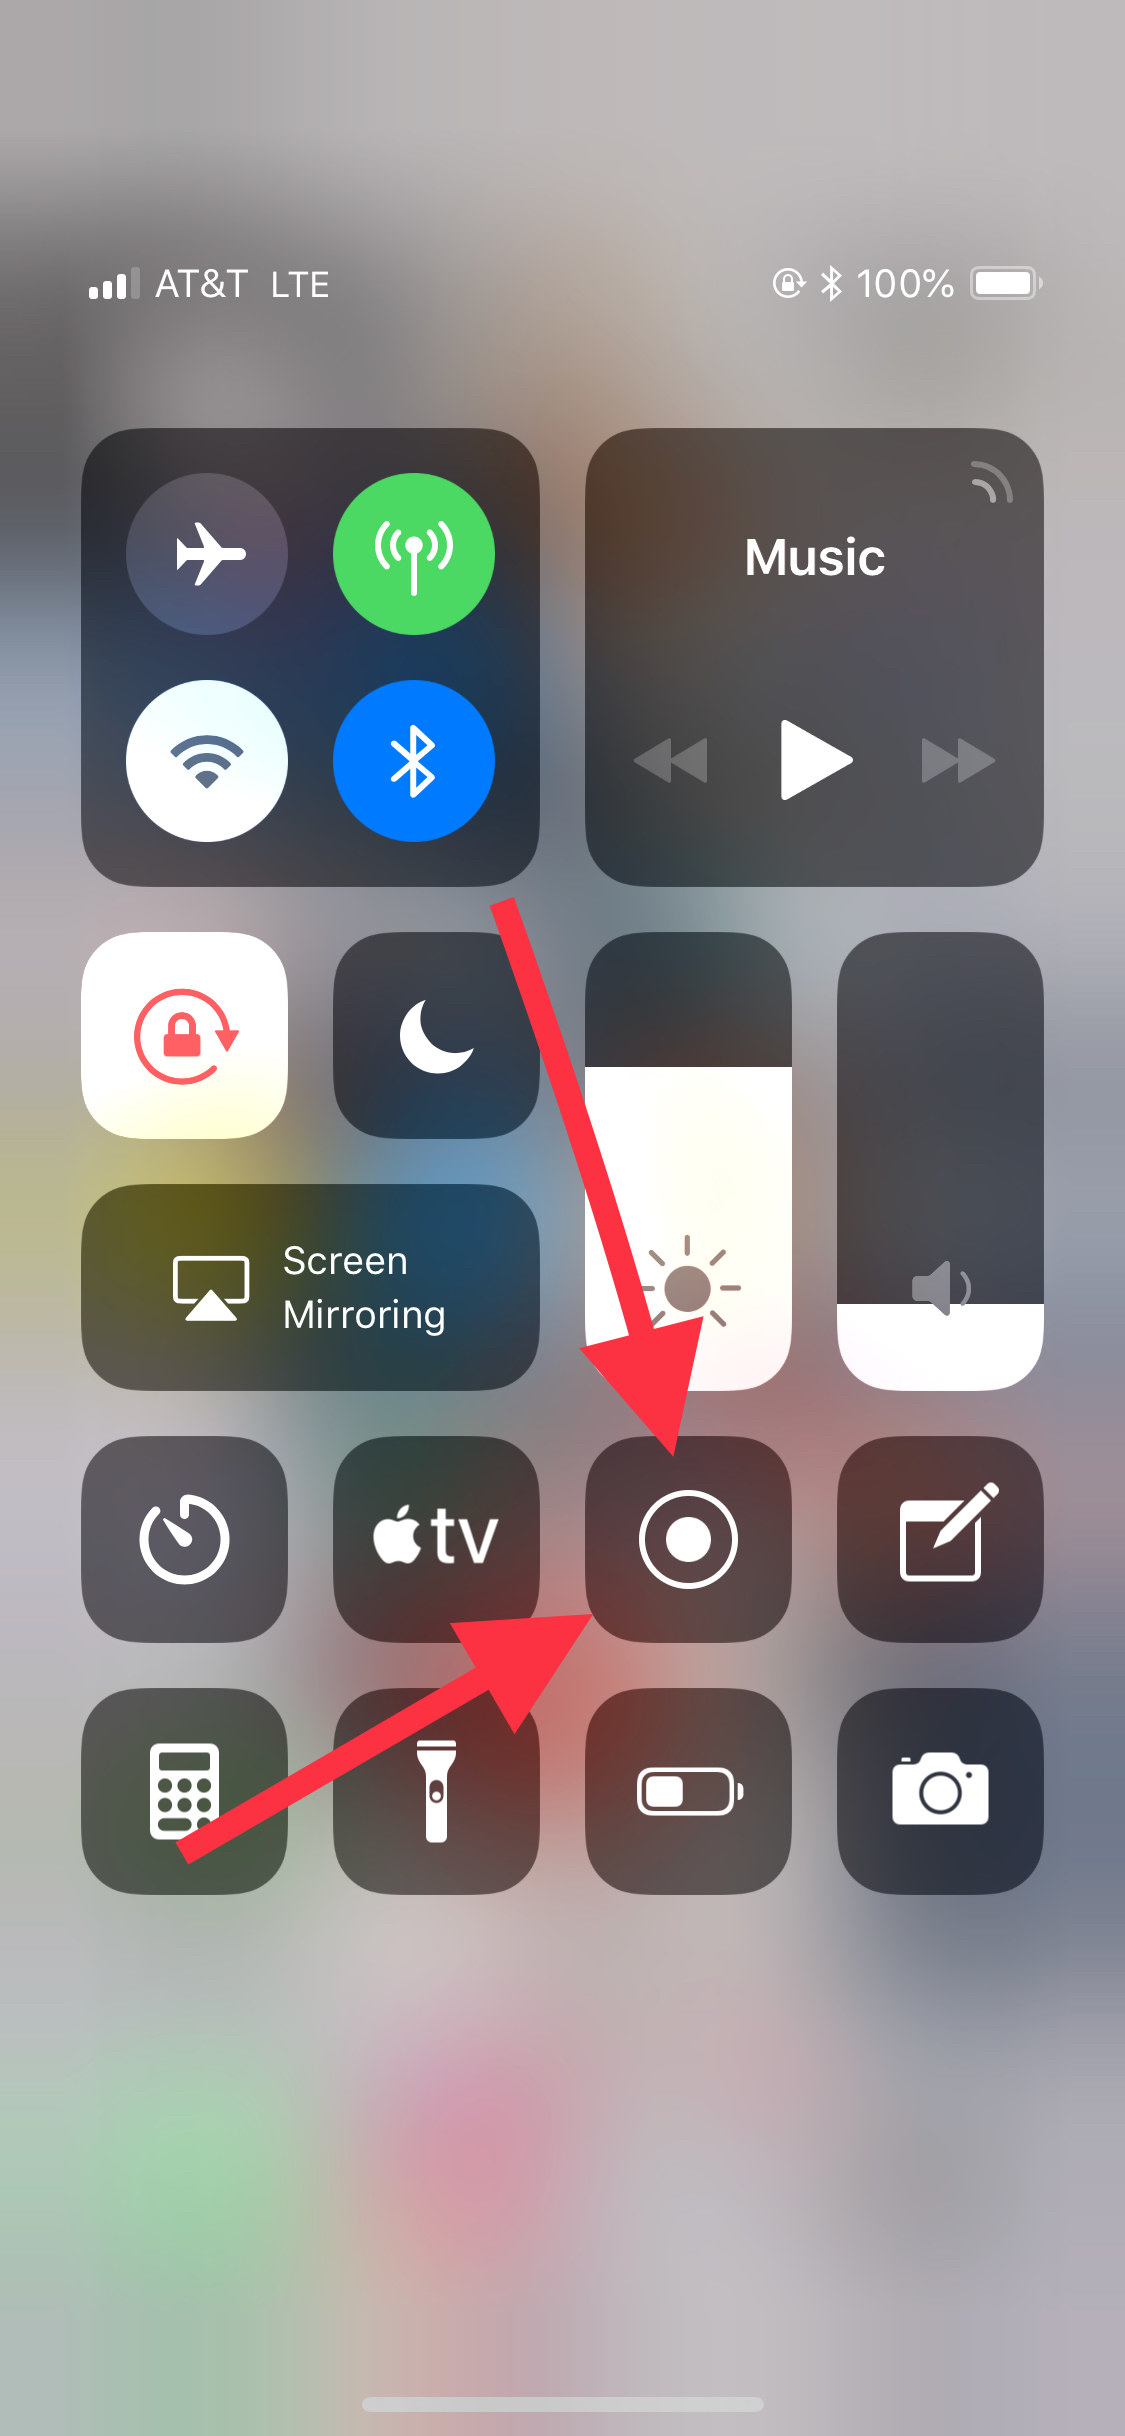 Arrows pointing to Screen Recording option in Control Center